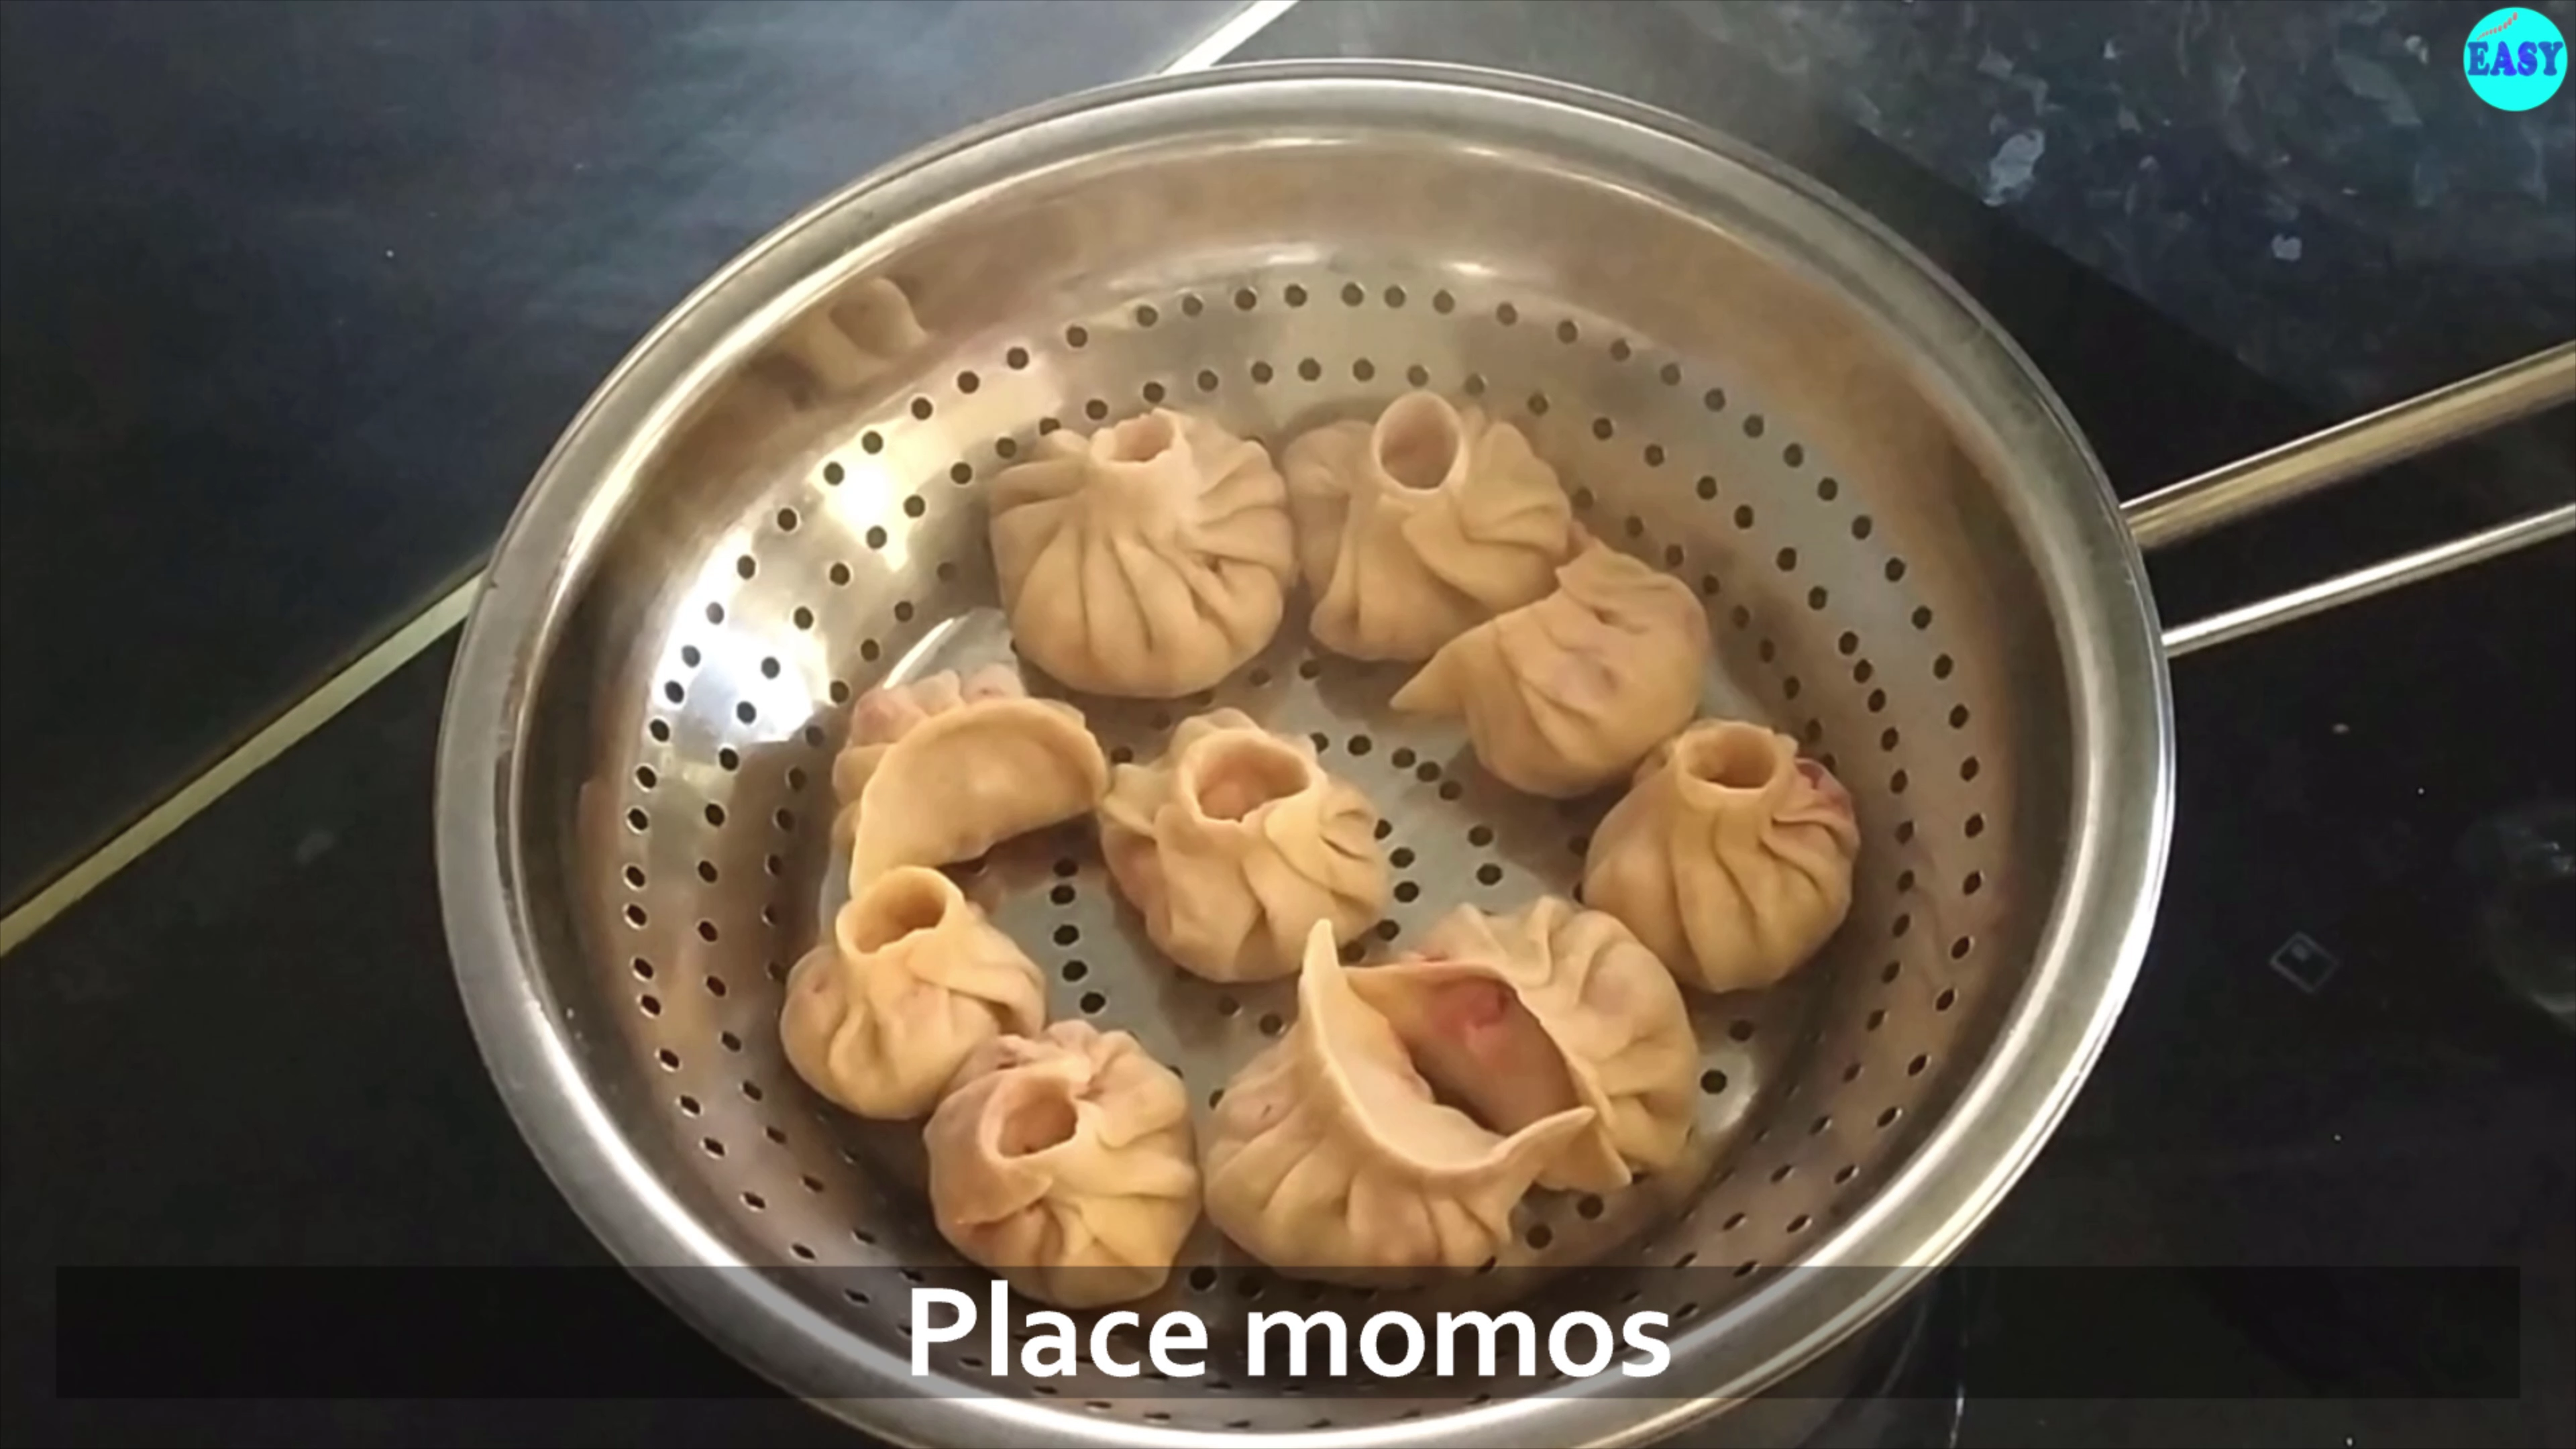 Step 13 - For steaming momos grease a strainer with some oil. Boil 1 -2 cup of water in a pan .Once it comes to a boil,place momos in strainer and steam for 12-15 min. 